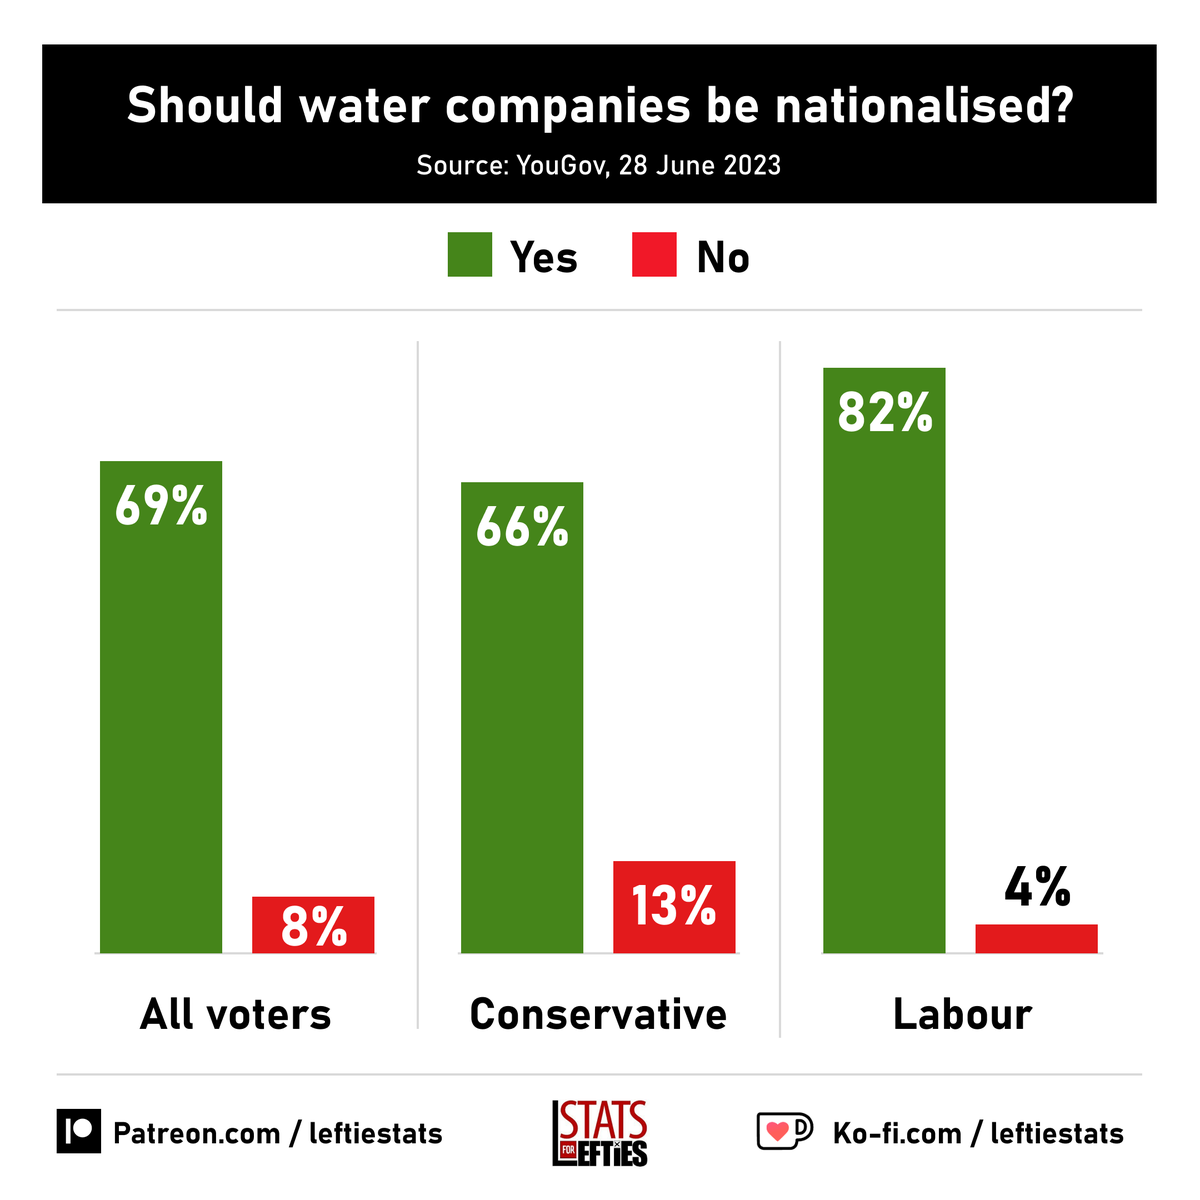 🗳️ Should water companies be nationalised?

✅ Yes 69%
❌ No 8%

Despite 8 in 10 Labour voters backing nationalisation of water, Labour's leadership has repeatedly ruled it out.

Via @YouGov, 28 June